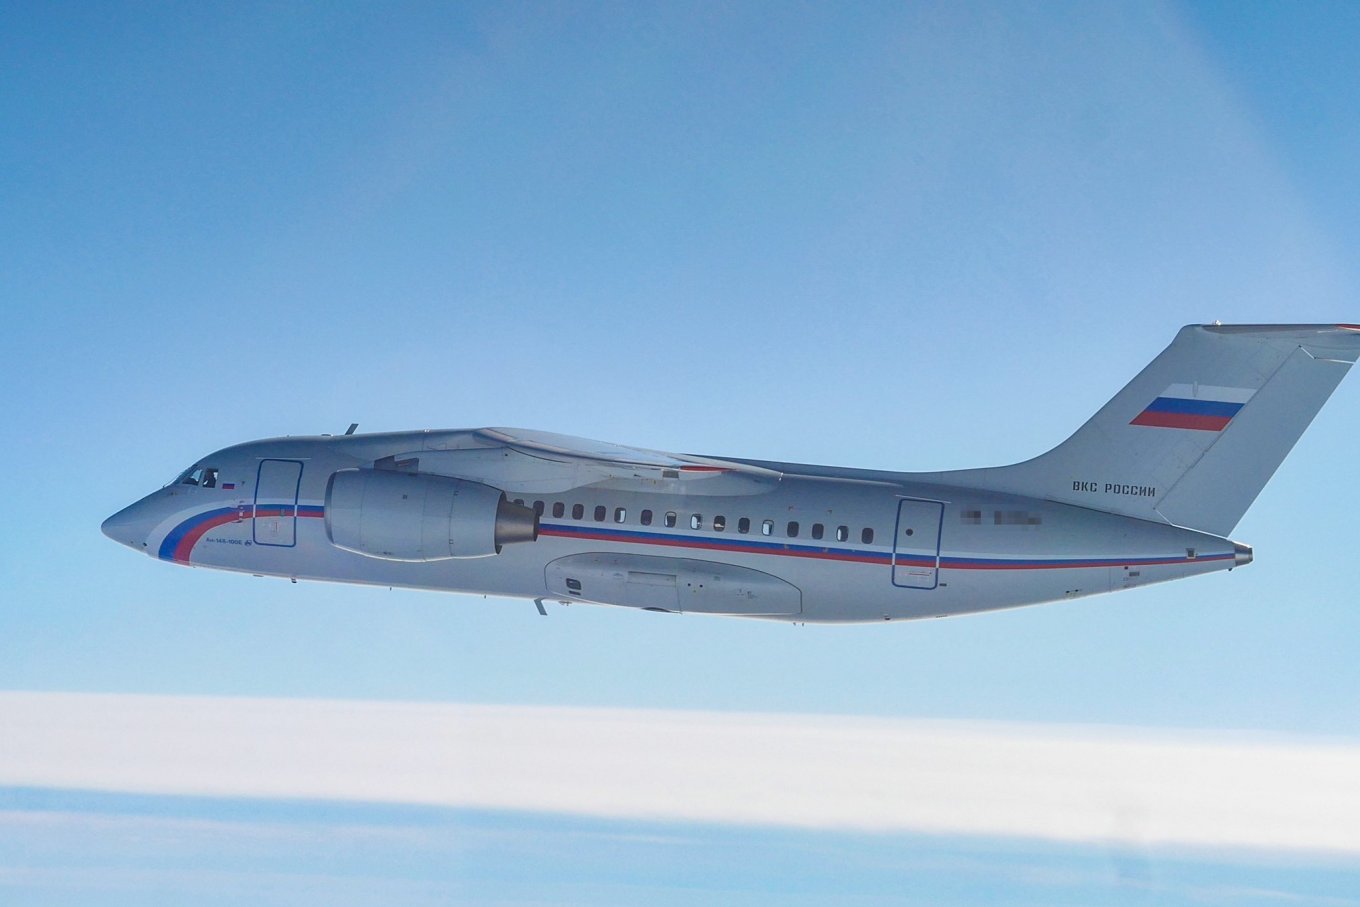 The An-148 regional jet that was intercepted on March 14, 2023 Defense Express Does russia Use Civil and Transport Aircraft to Violate the Airspace Because it Rans Out of Combat Aircraft